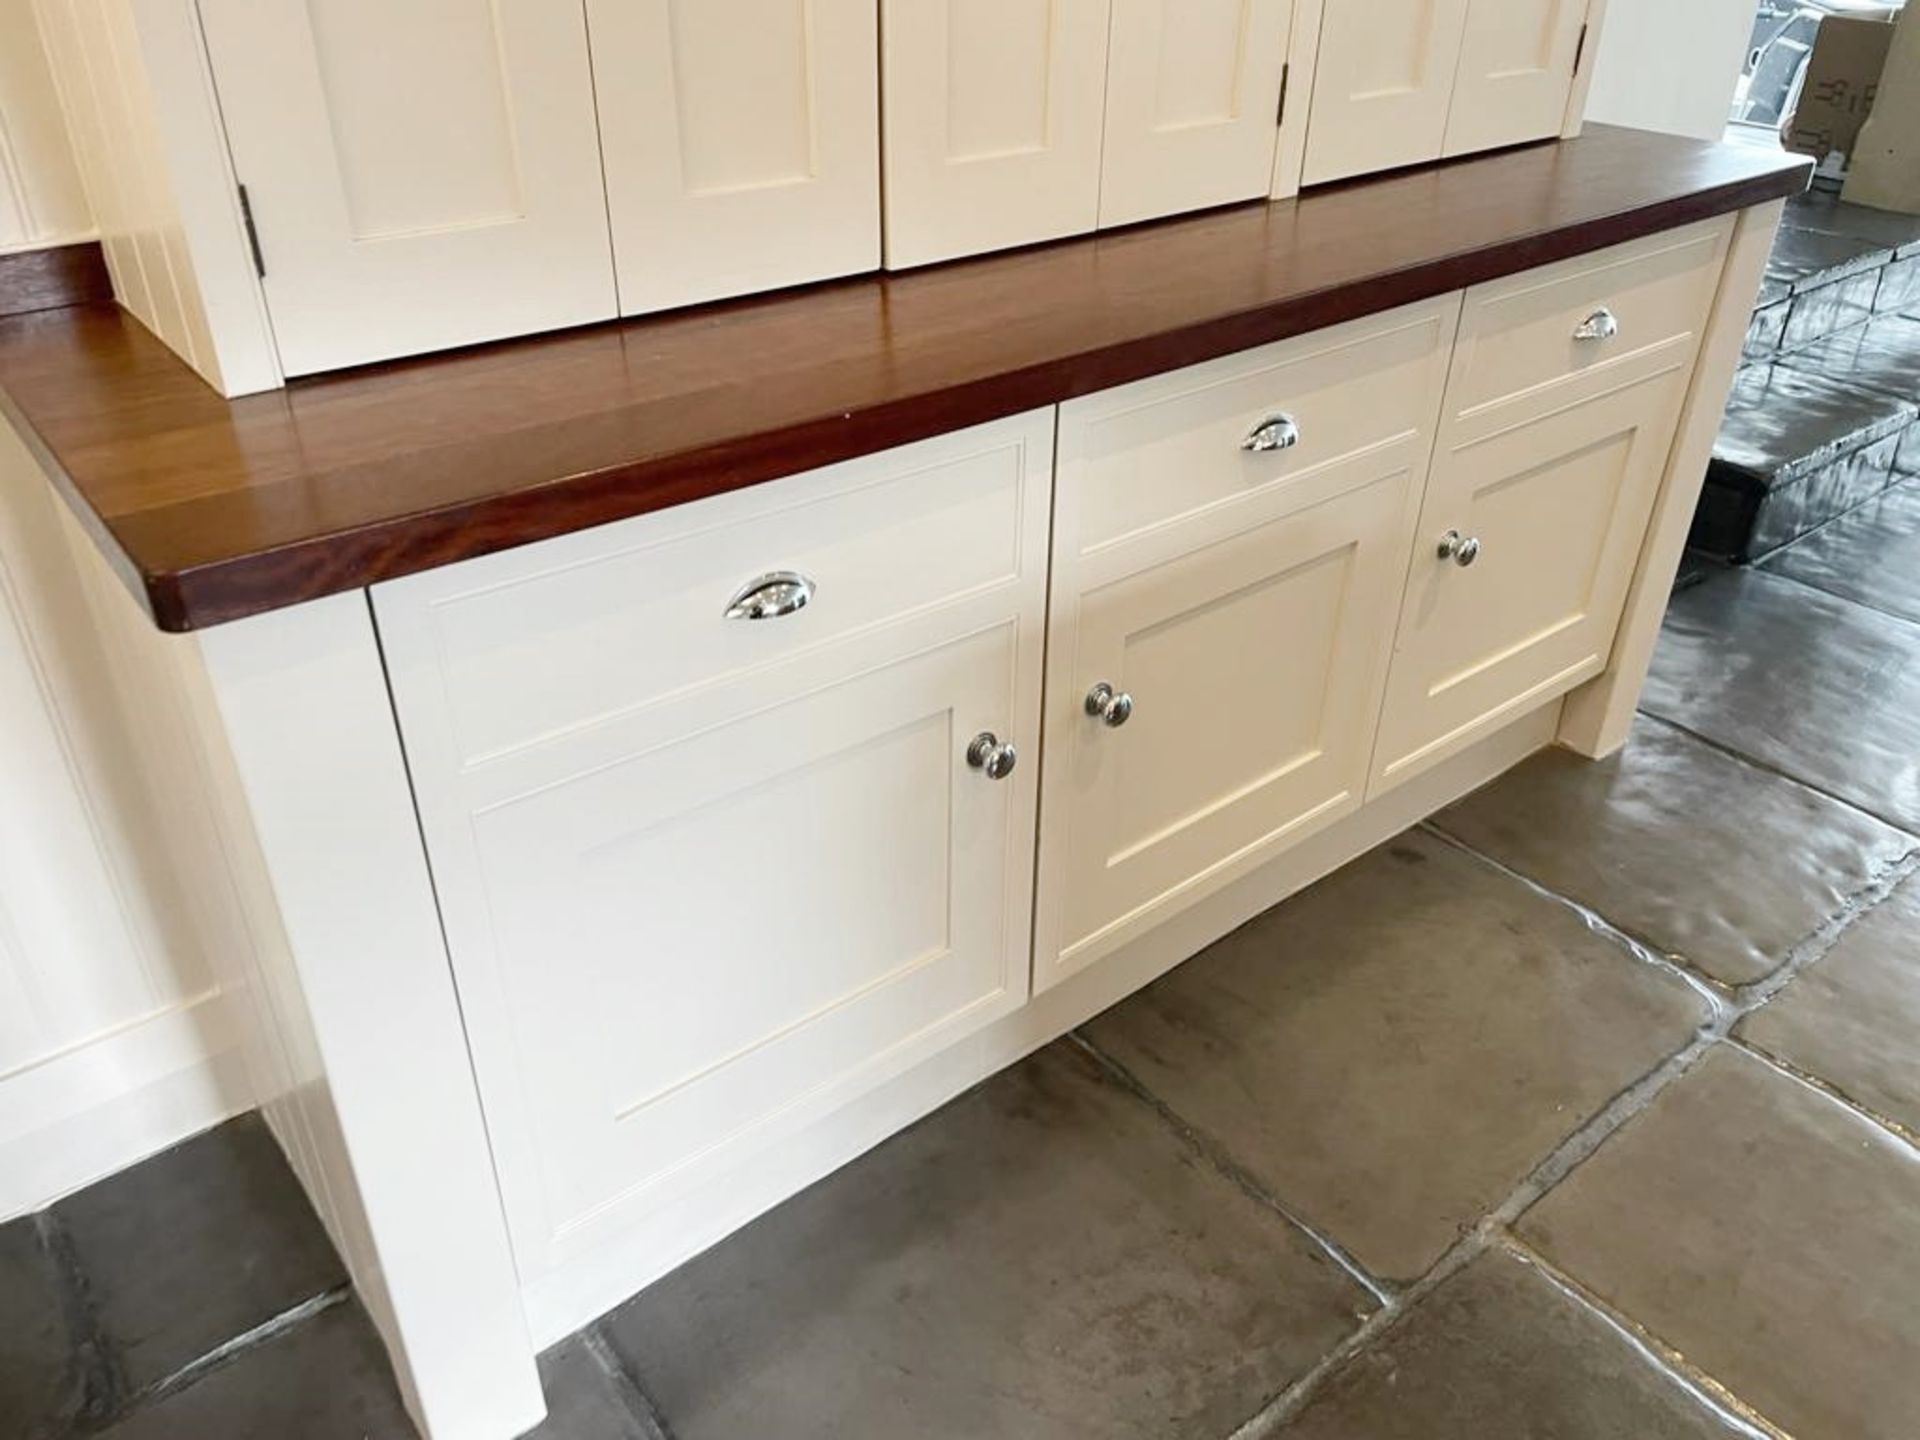 1 x Bespoke French Country Kitchen With Solid Wood In-frame Doors, Belfast Sink & Granite Work Tops - Image 16 of 55